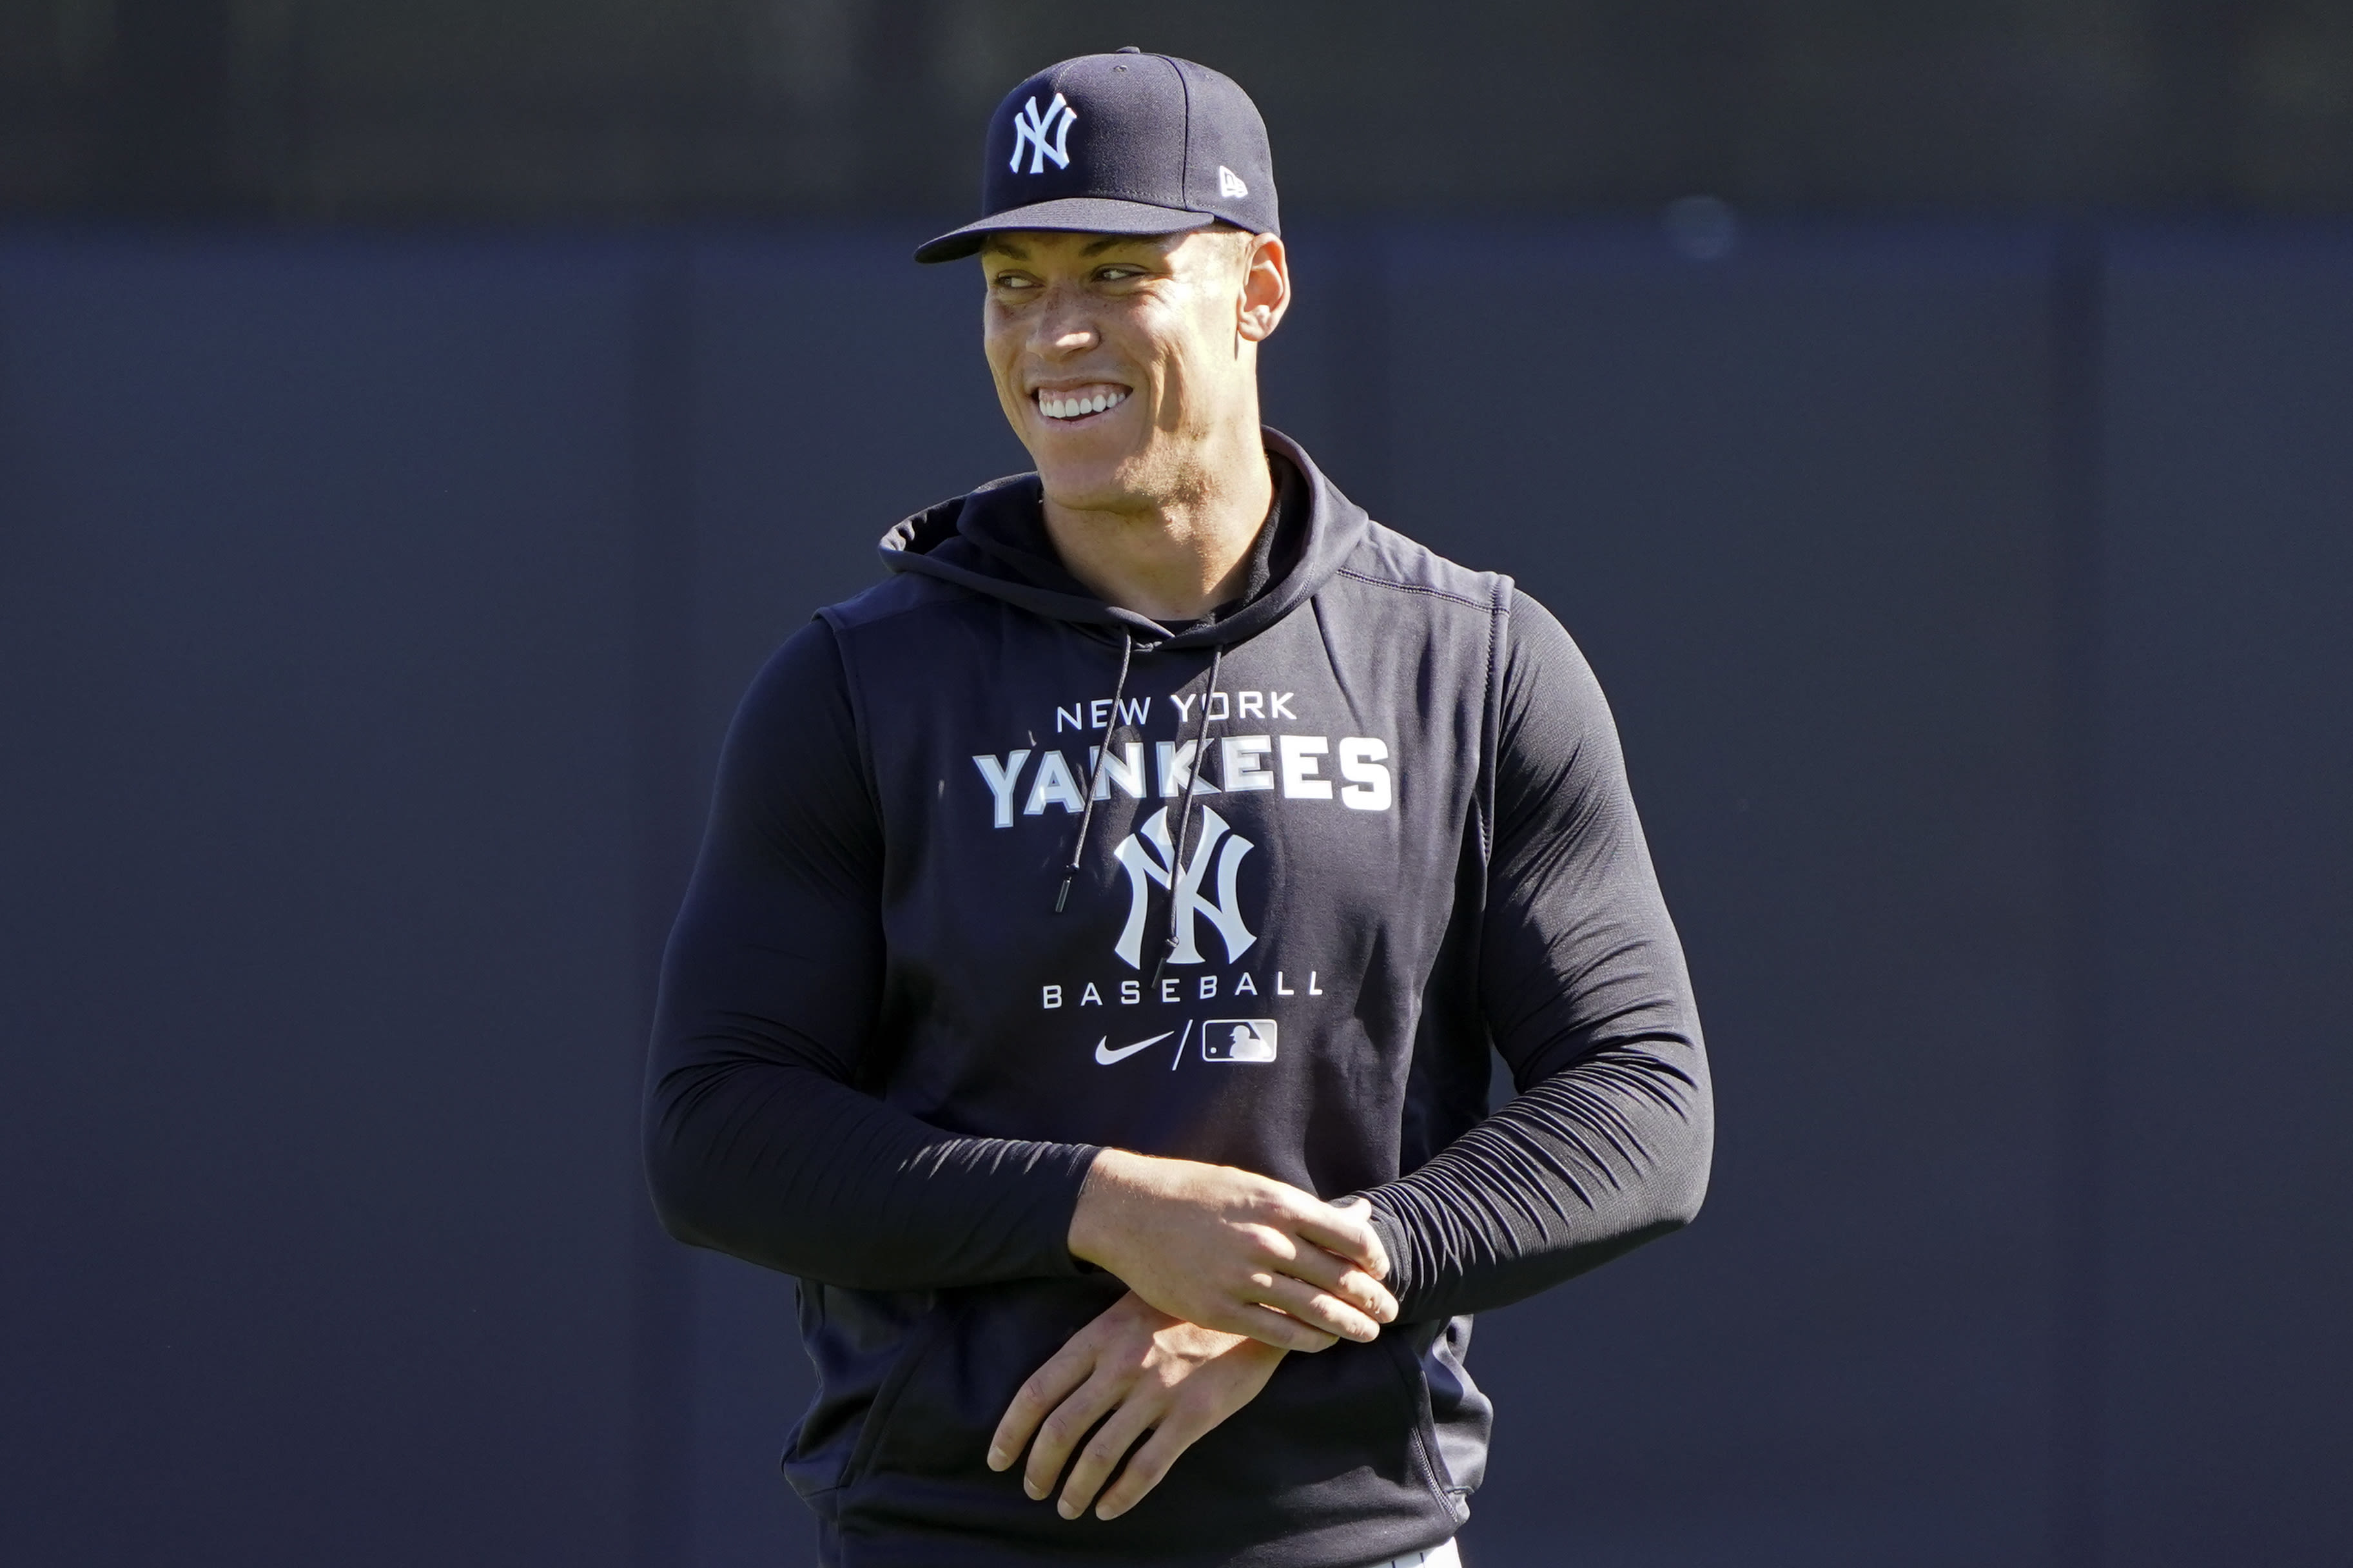 Aaron Judge has intriguing response about playing for Red Sox